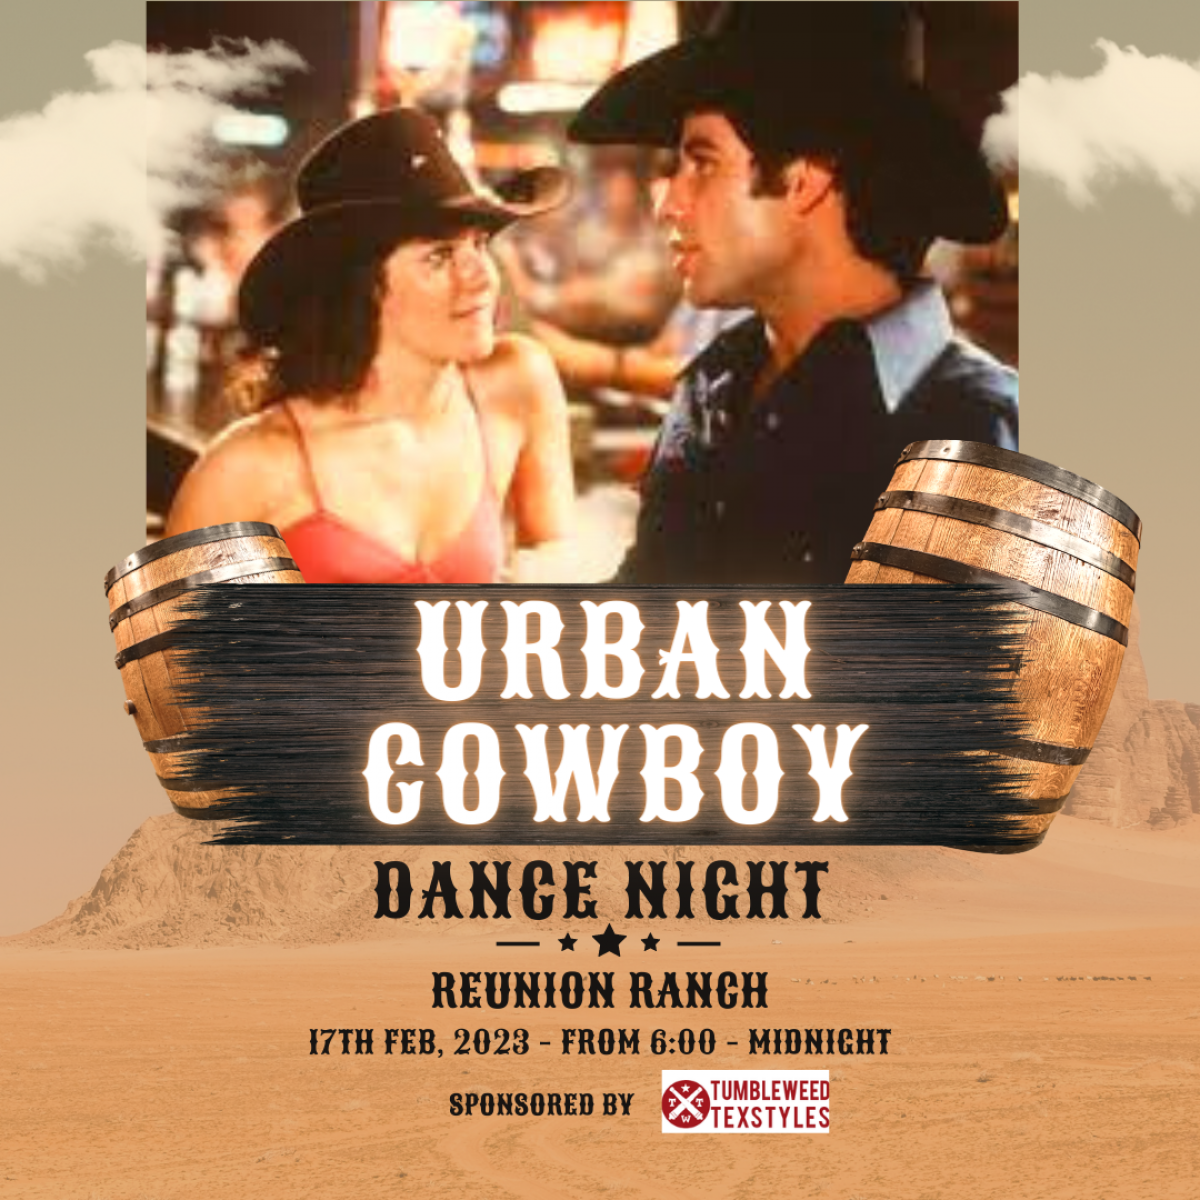 Enter To Win Two Tickets to Urban Cowboy Dance Night at Reunion Ranch